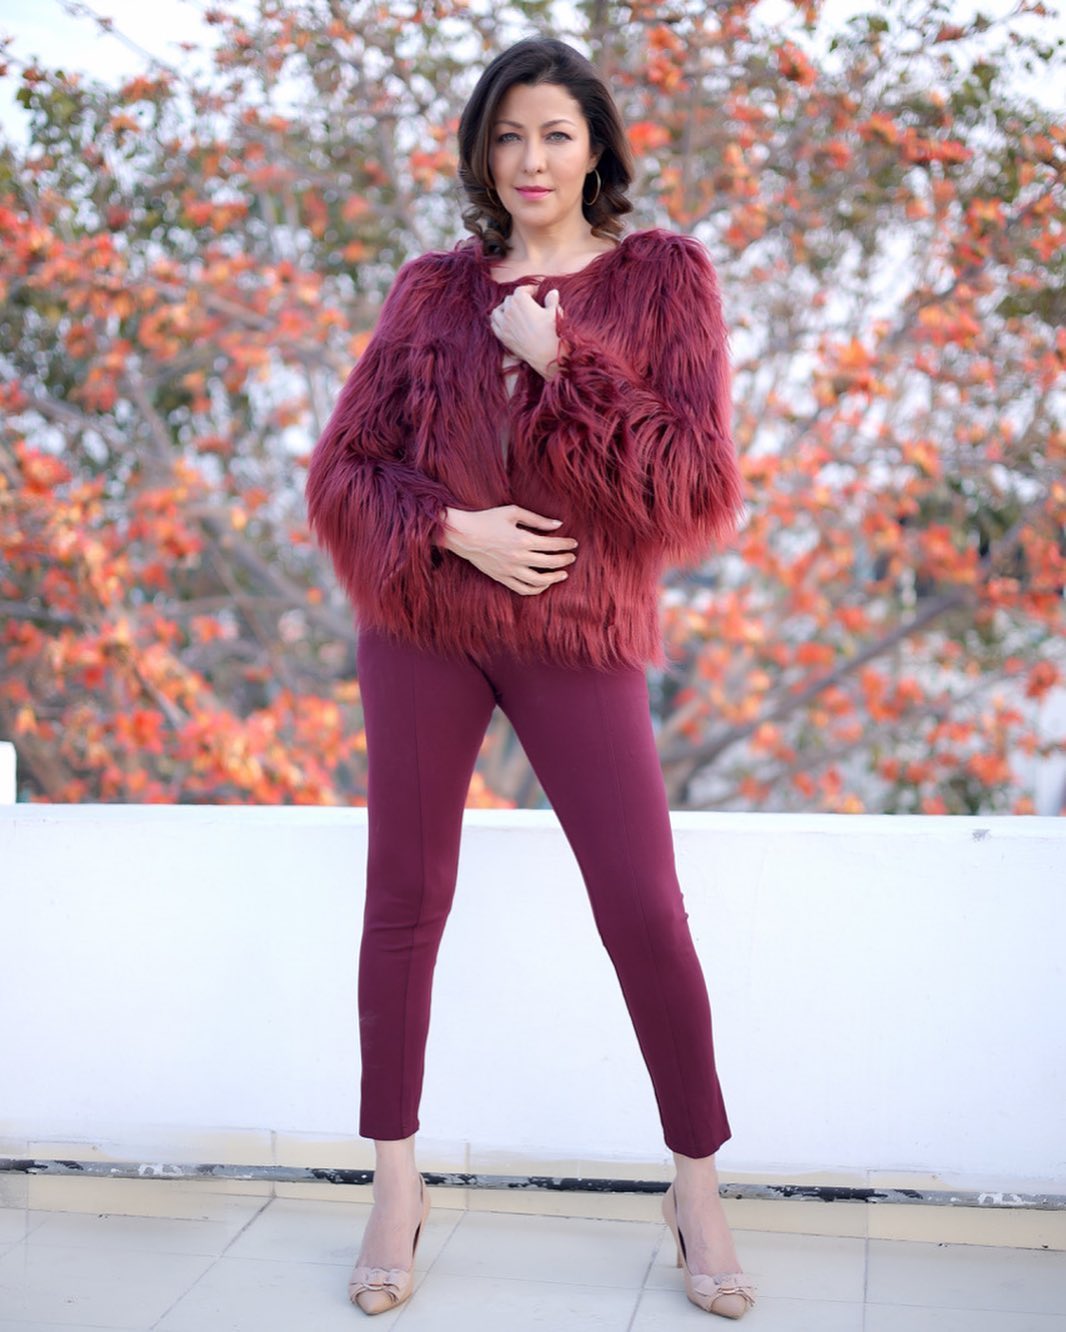 Sexy and Classy Aditi Govitrikar In Red Faux Fur Jacket and Pant Look